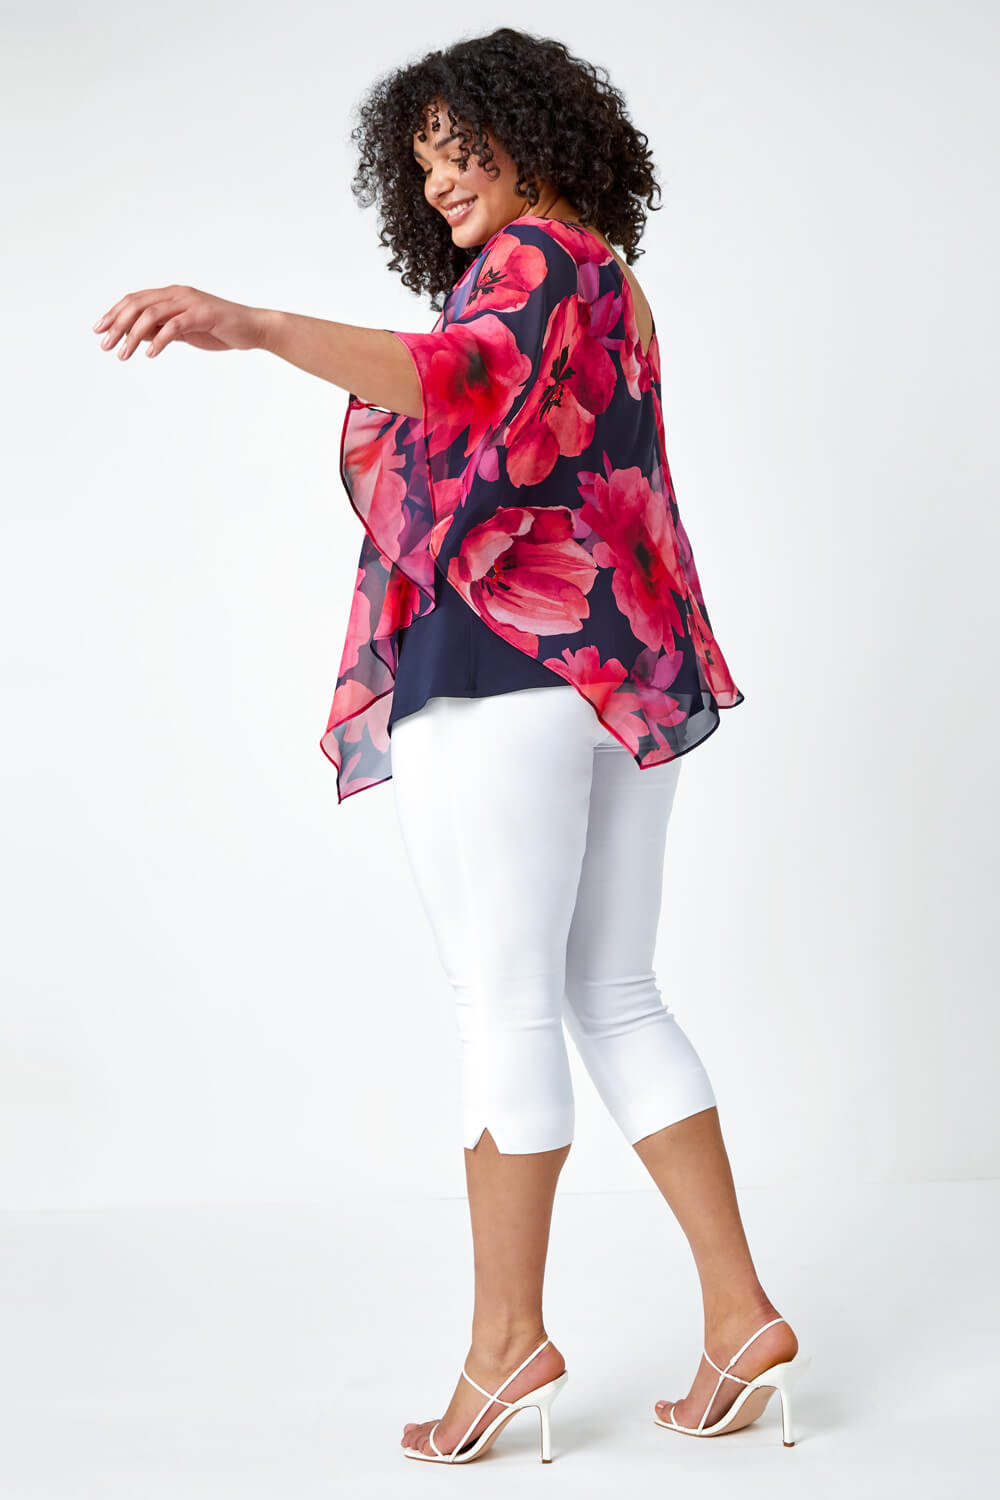 PINK Curve Floral Print Chiffon Overlay Top, Image 3 of 5